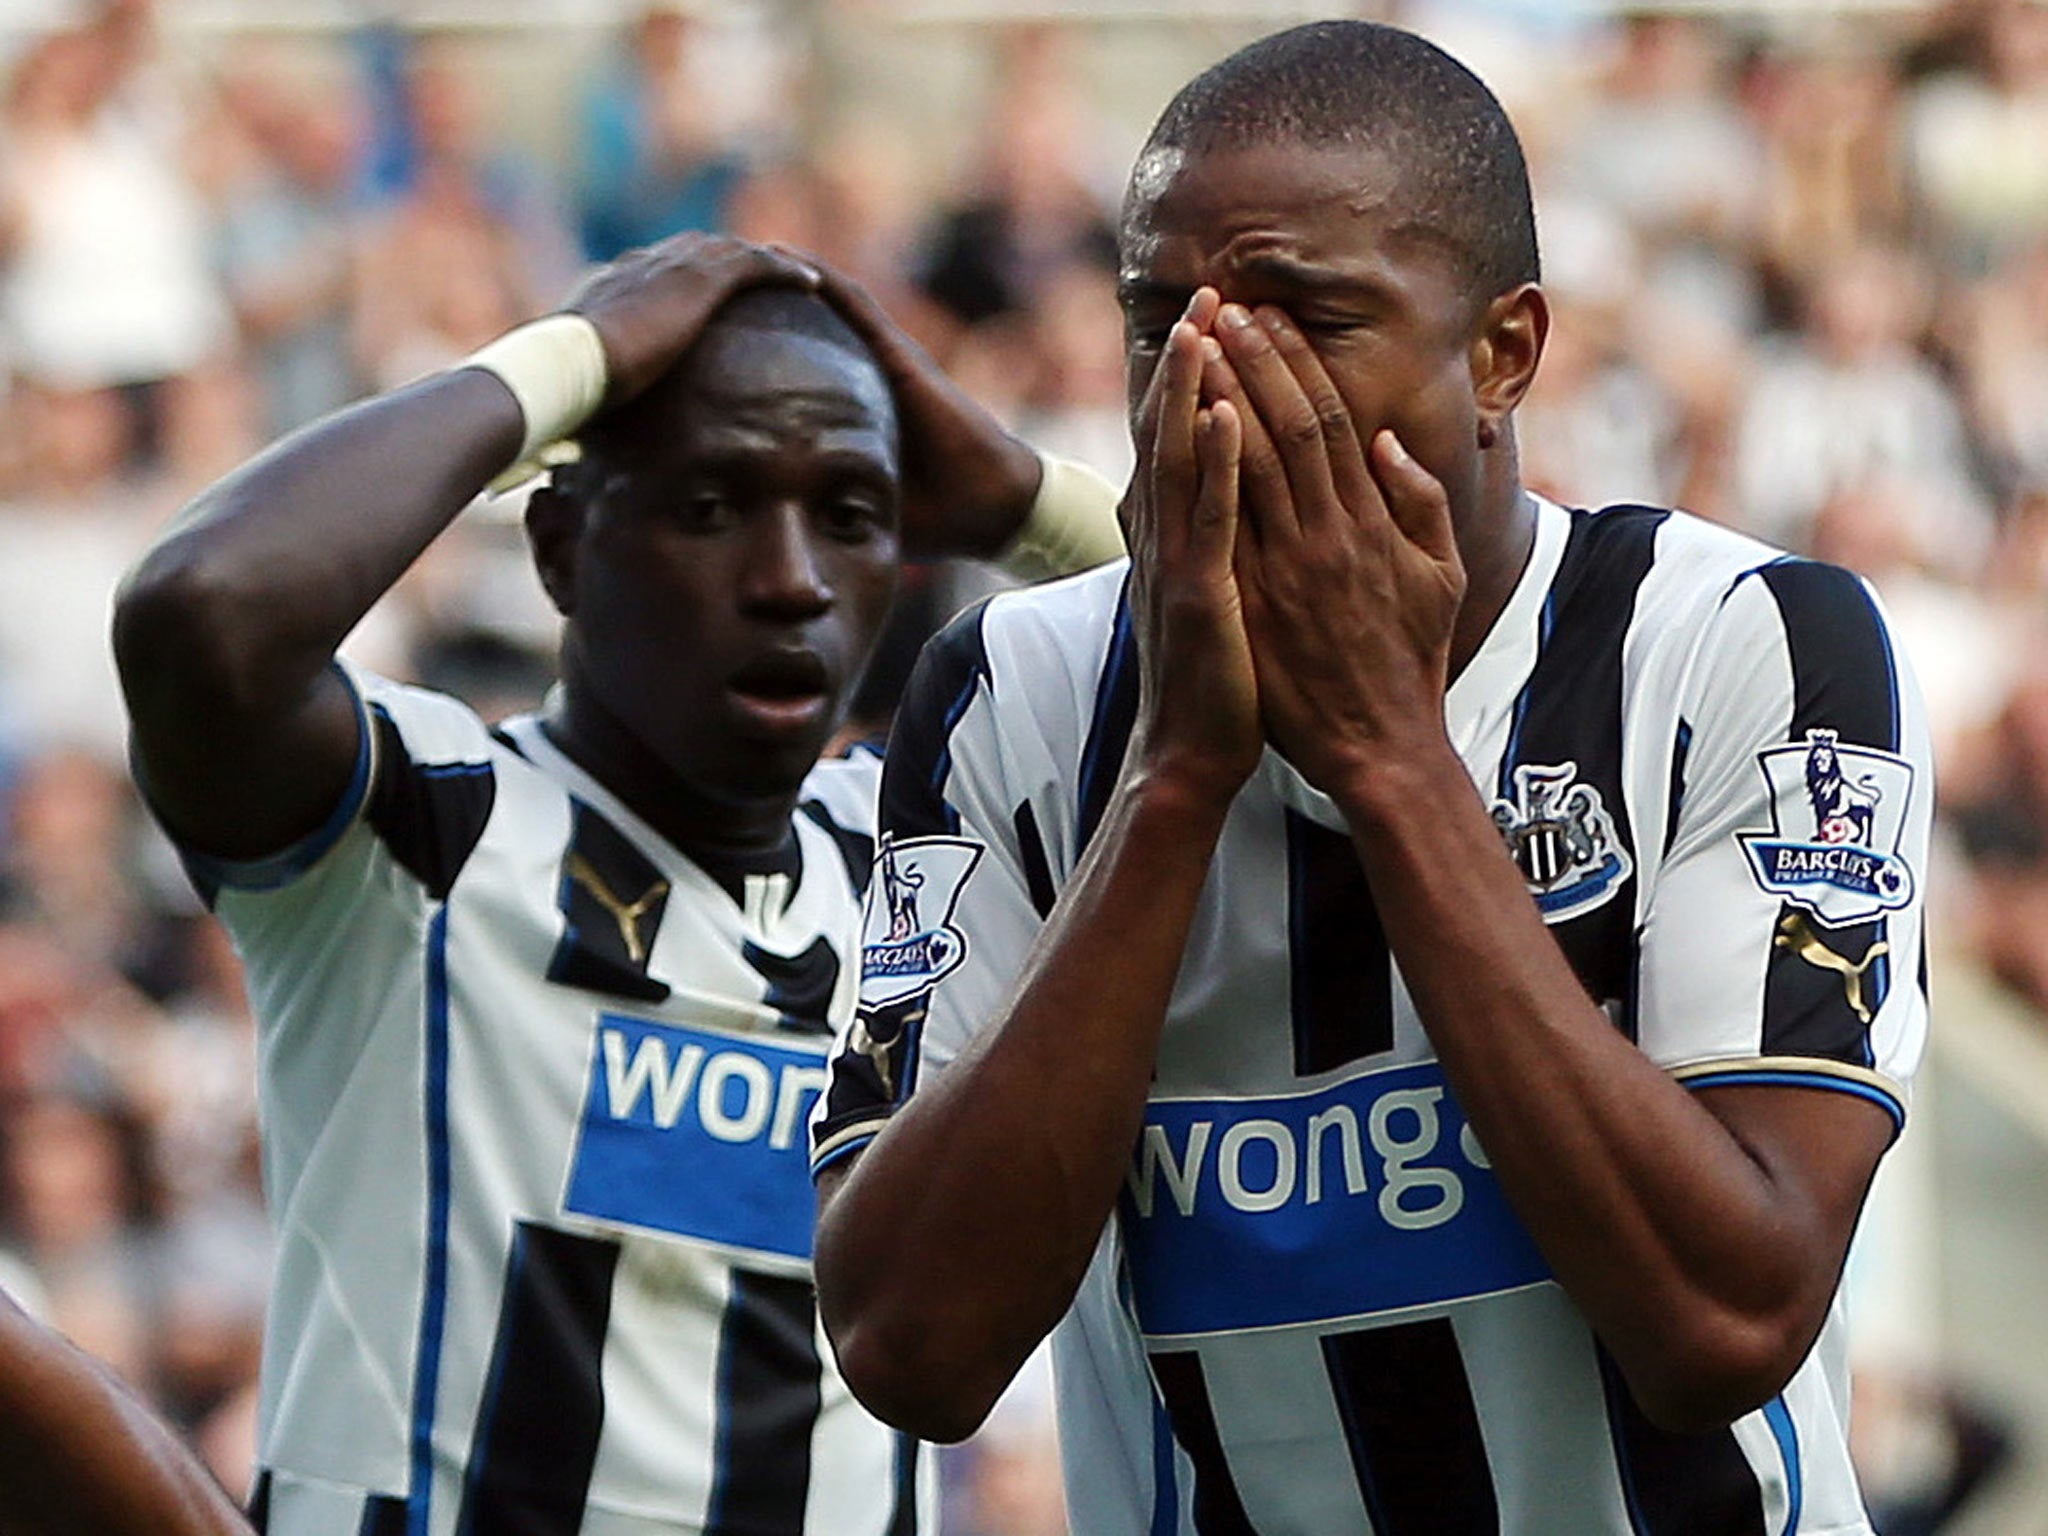 Moussa Sissoko and Loic Remy of Newcastle